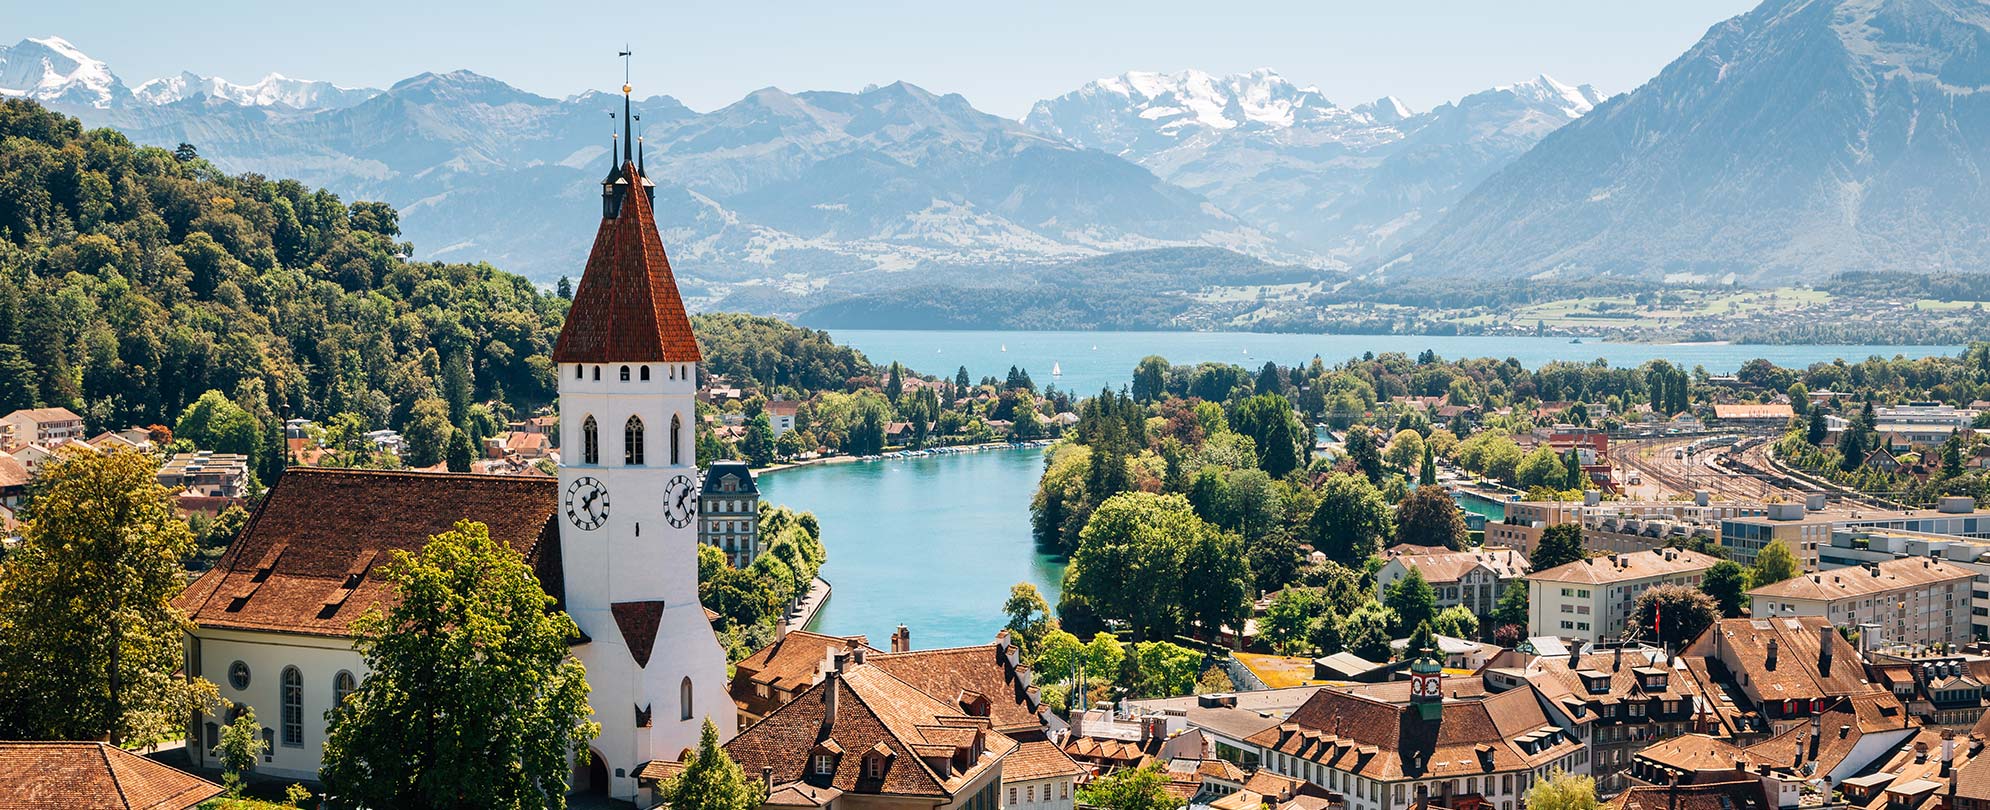 Panoramic view from the Swiss Alps of a town and river in Bern, Switzerland.